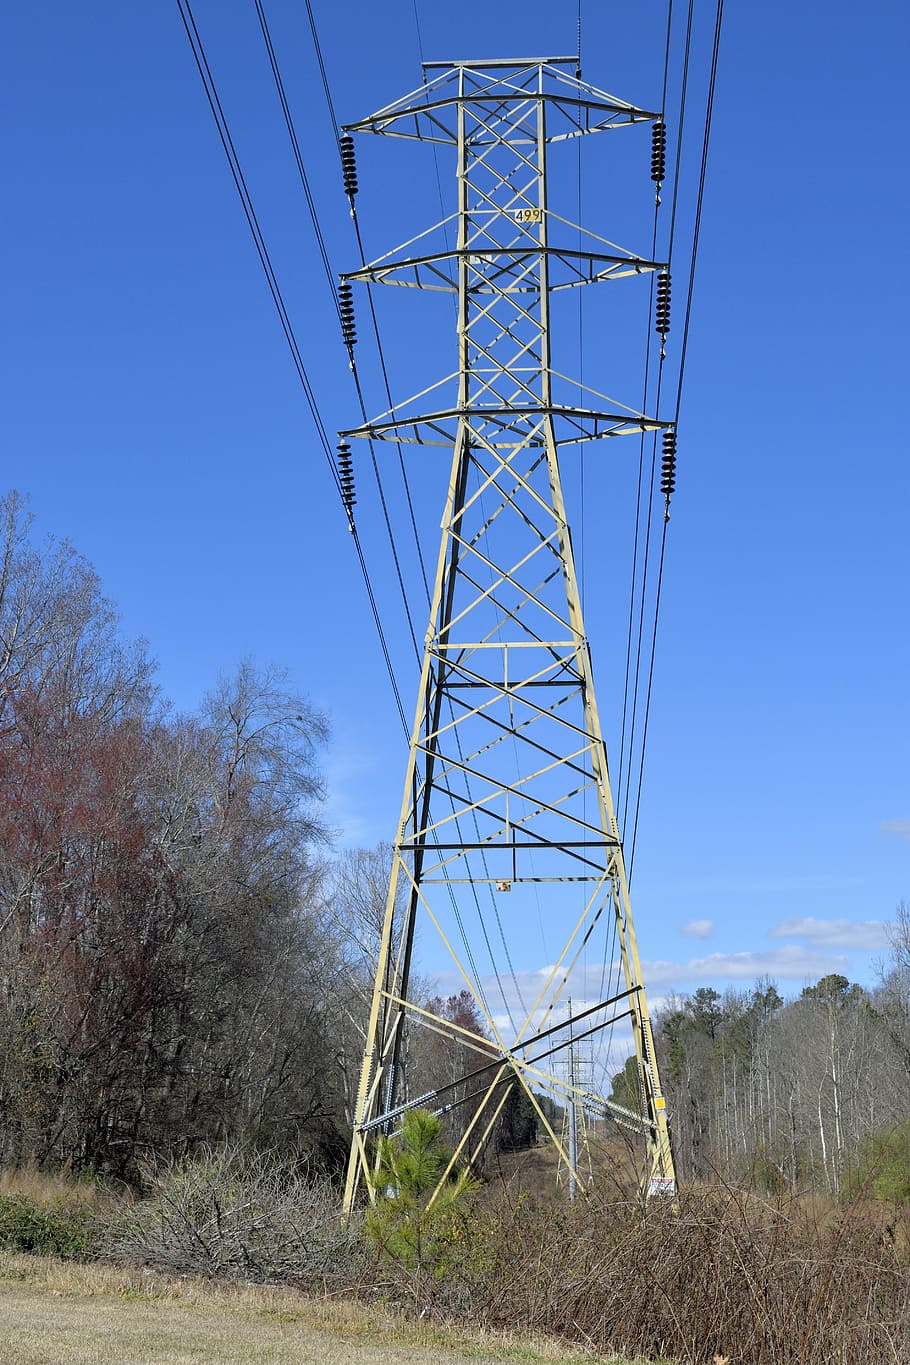 pylon, electricity, power, energy, electric, industry, technology, tower, voltage, sky